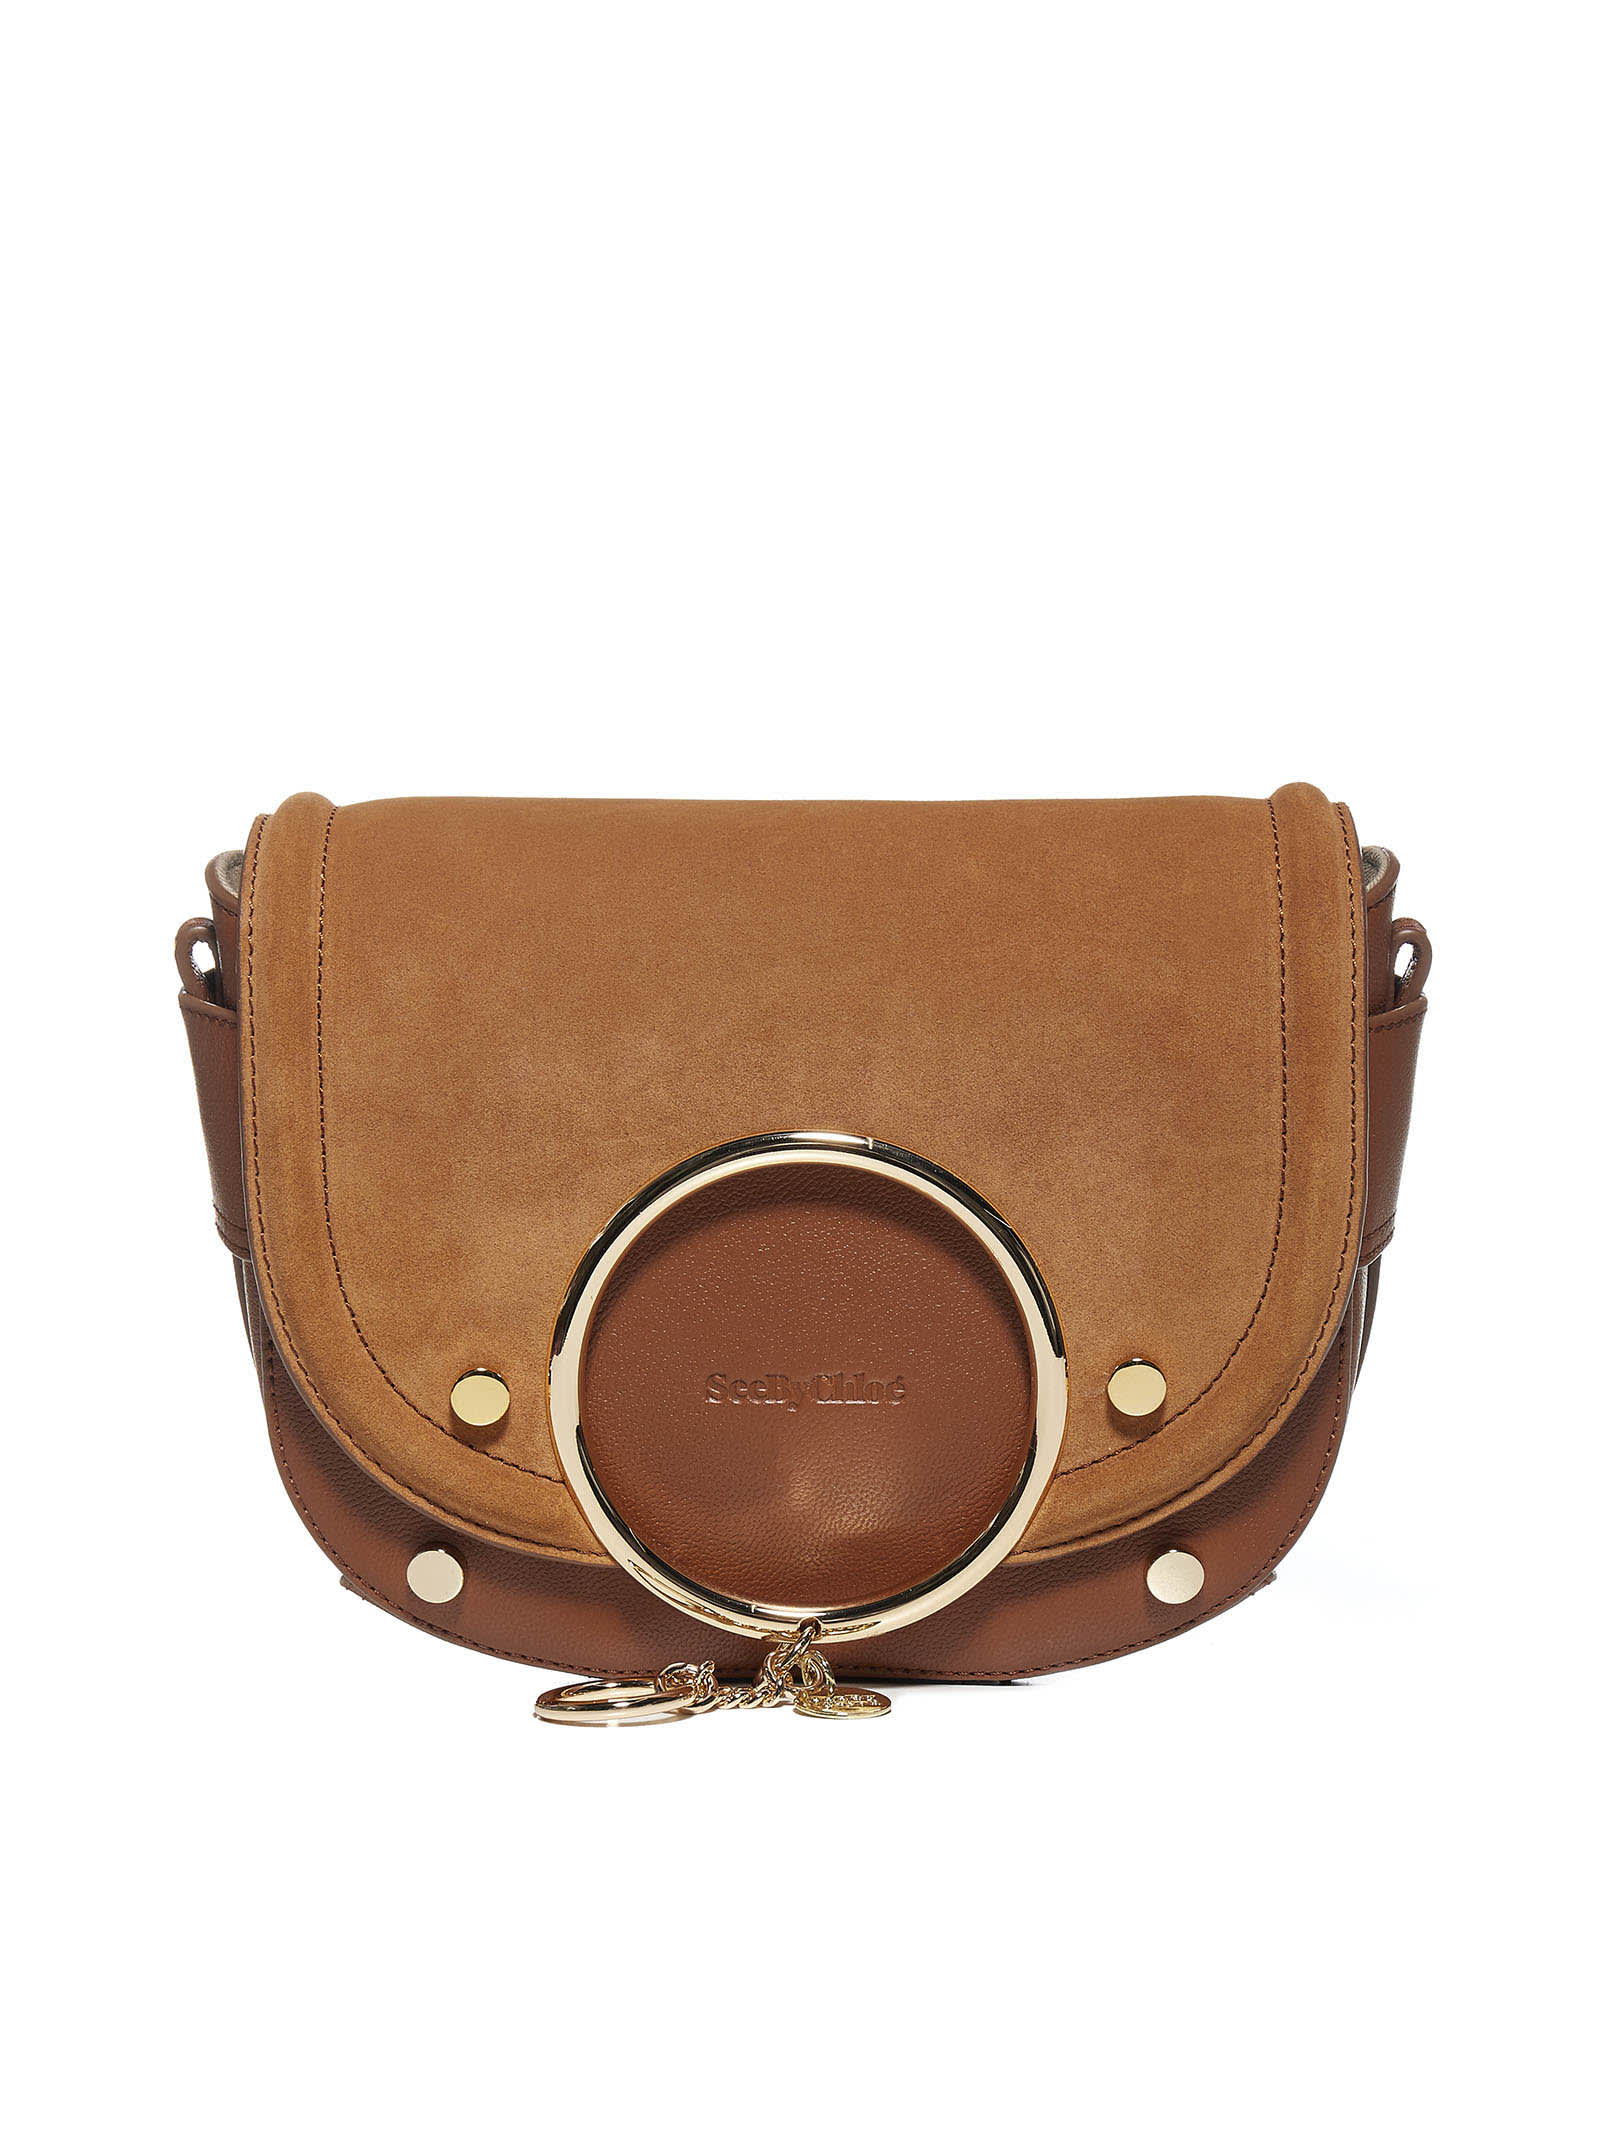 See by Chloé Mara Leather And Suede Shoulder Bag